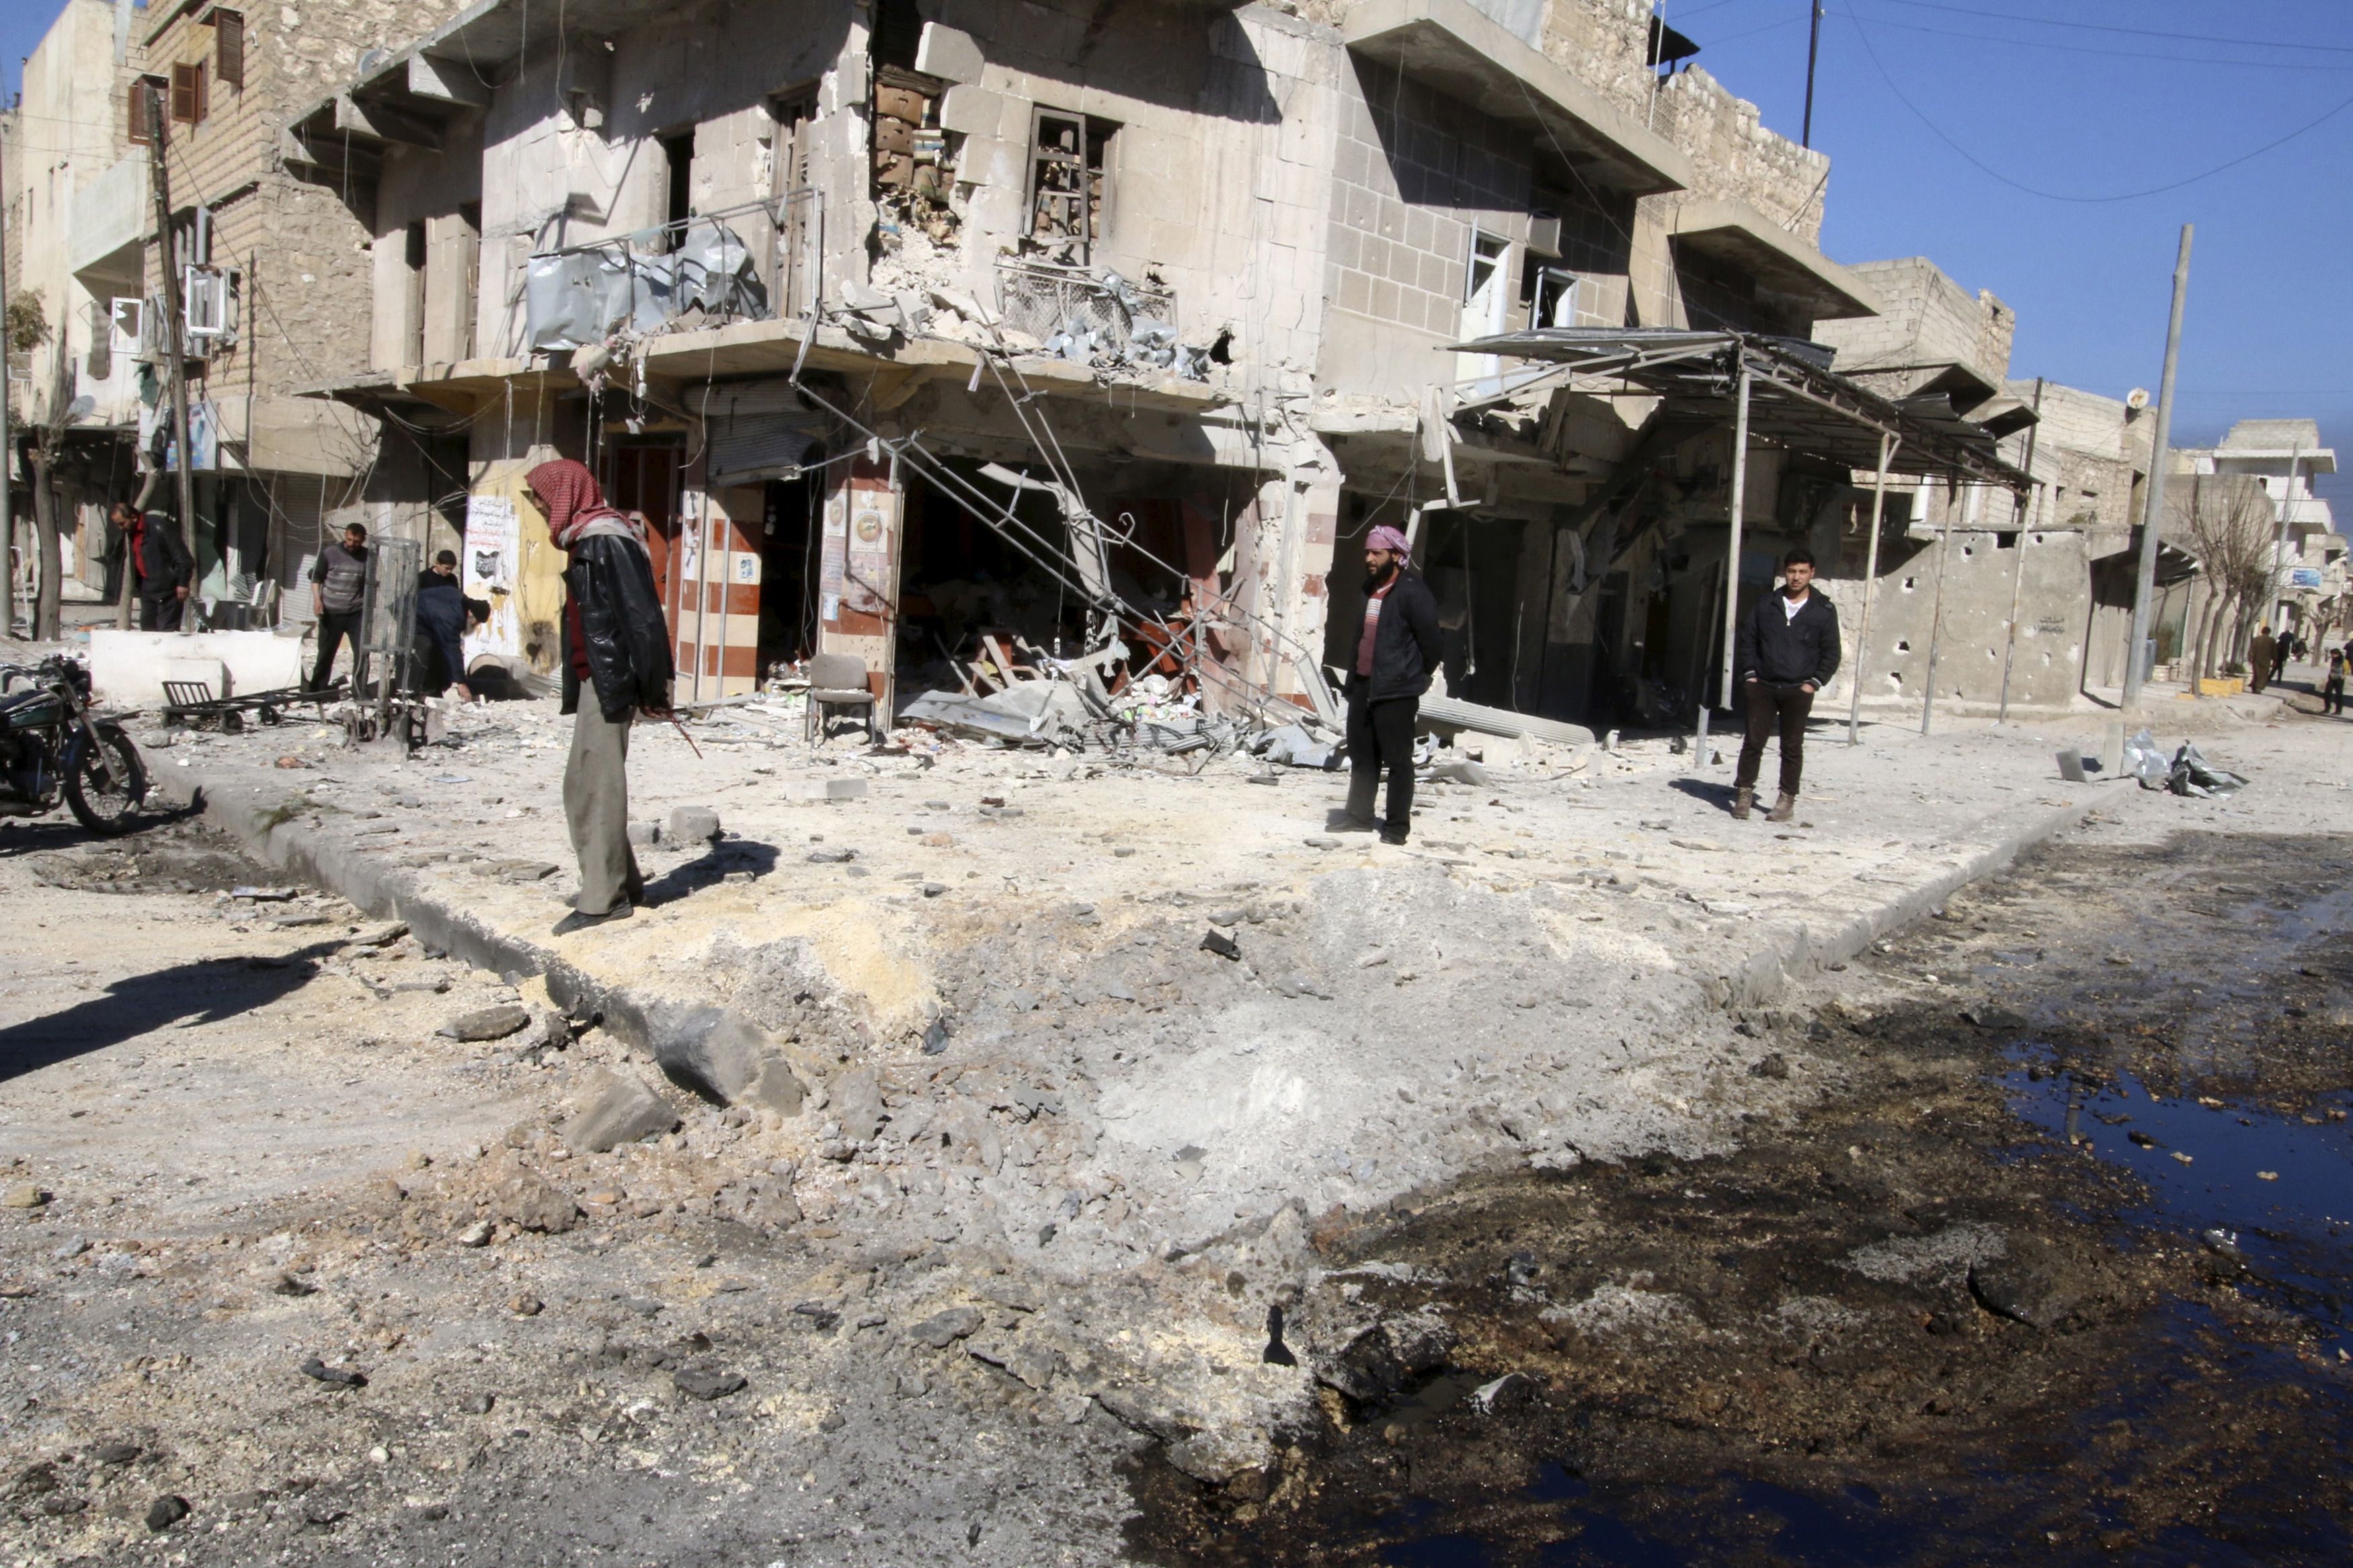 Residents inspect damage near a hole in the ground after airstrikes by pro-Syrian government forces in the rebel held Al-Shaar neighborhood of Aleppo, Syria February 4, 2016. (Abdalrhman Ismail—Reuters)